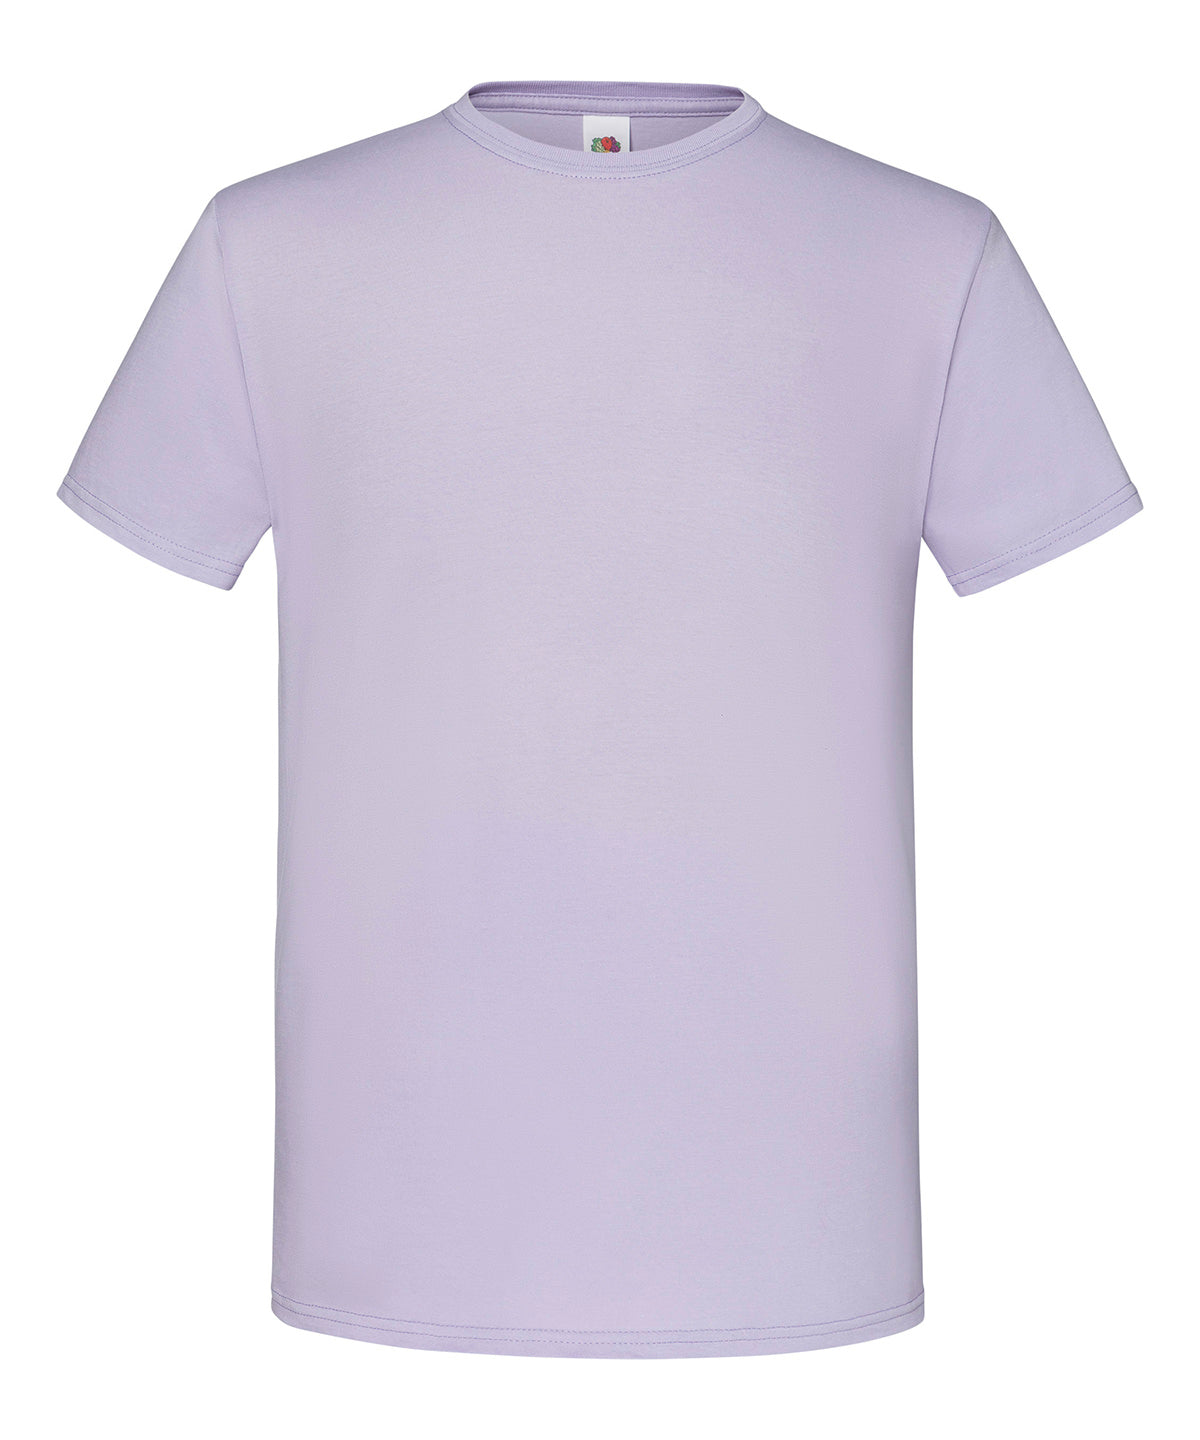 Fruit of the Loom Iconic 150 T Soft Lavender